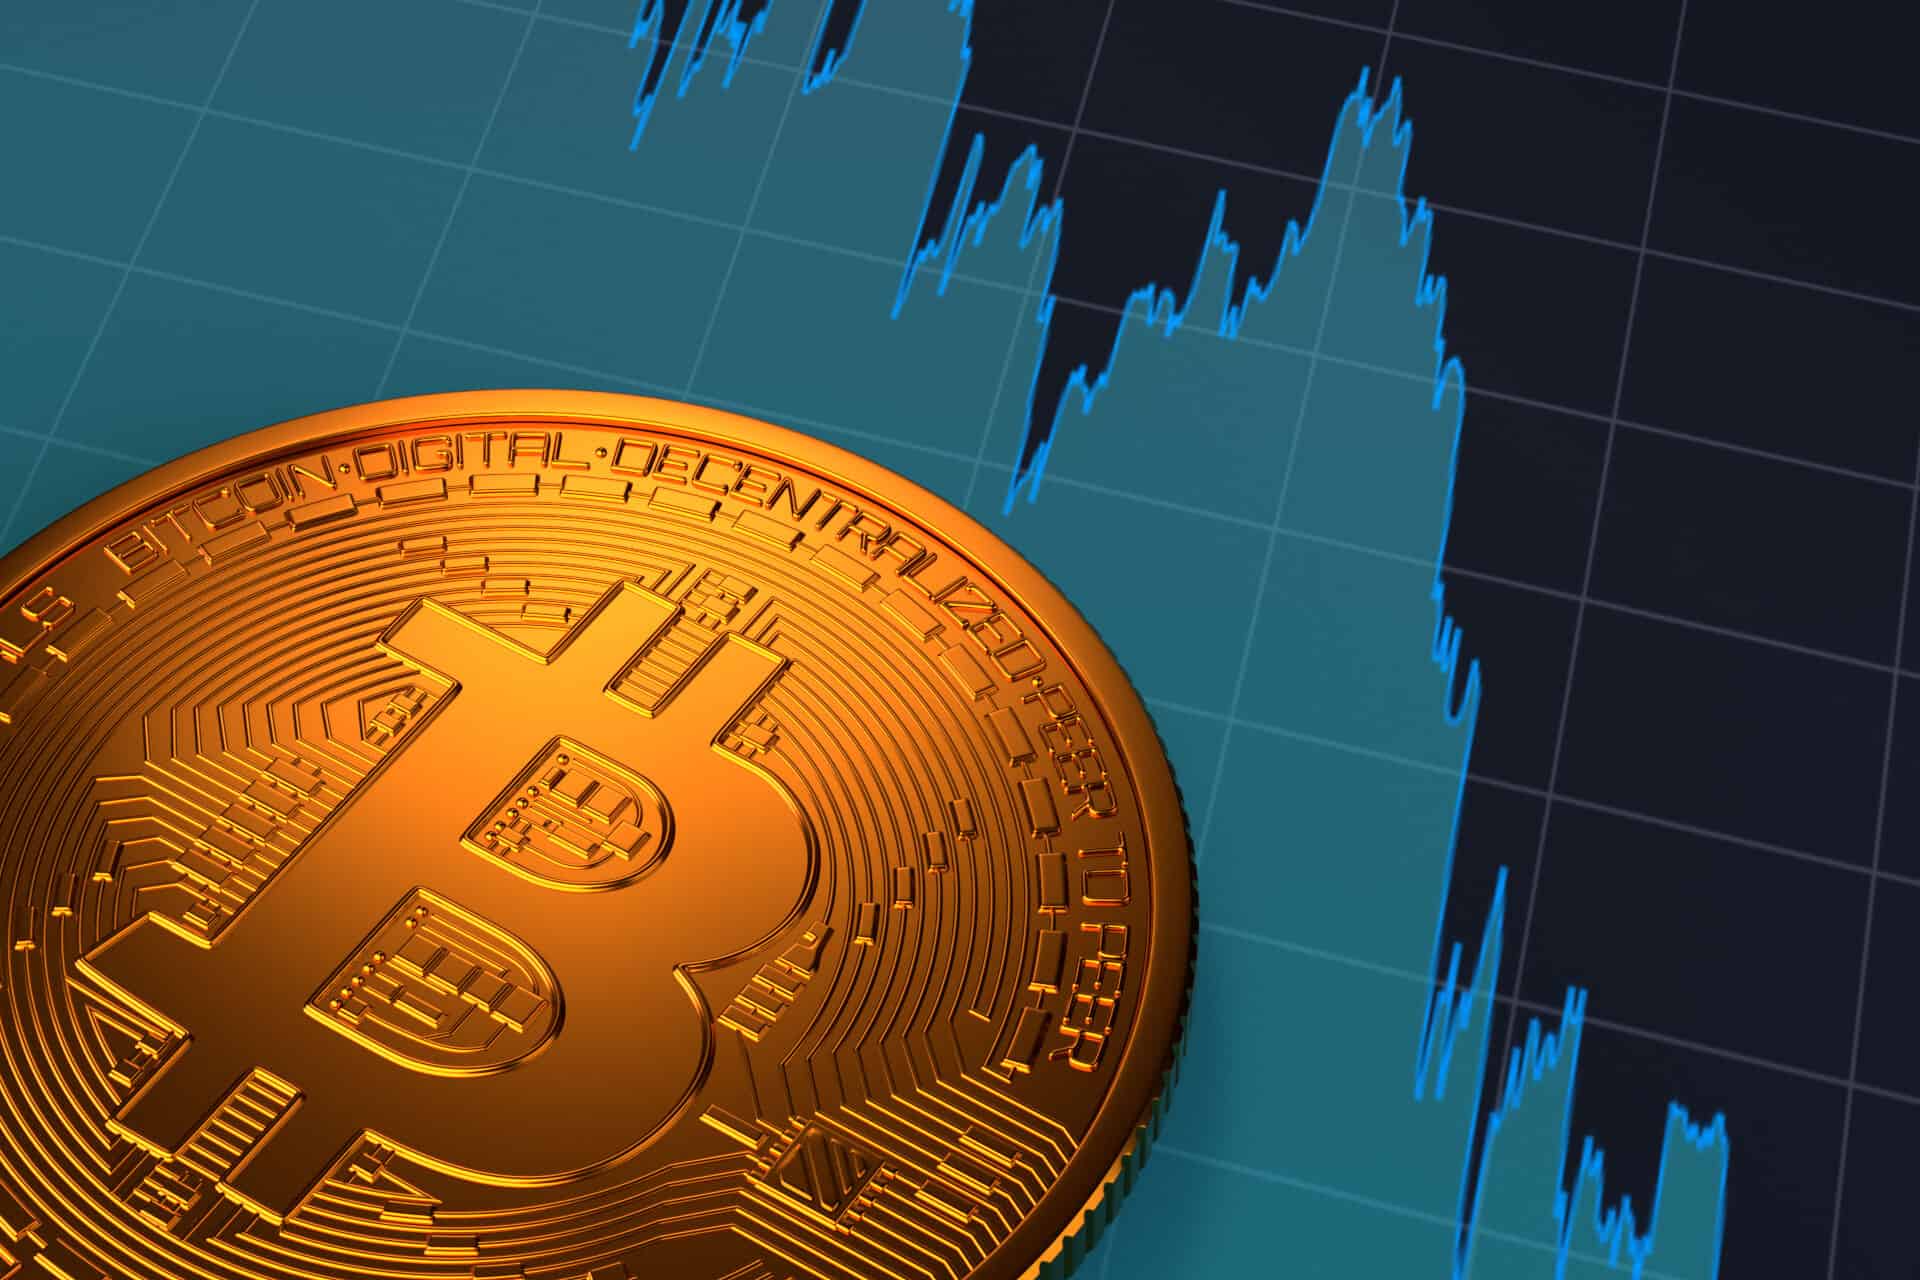 Bitcoin continues to hold above 30,000. Here's how its price action is